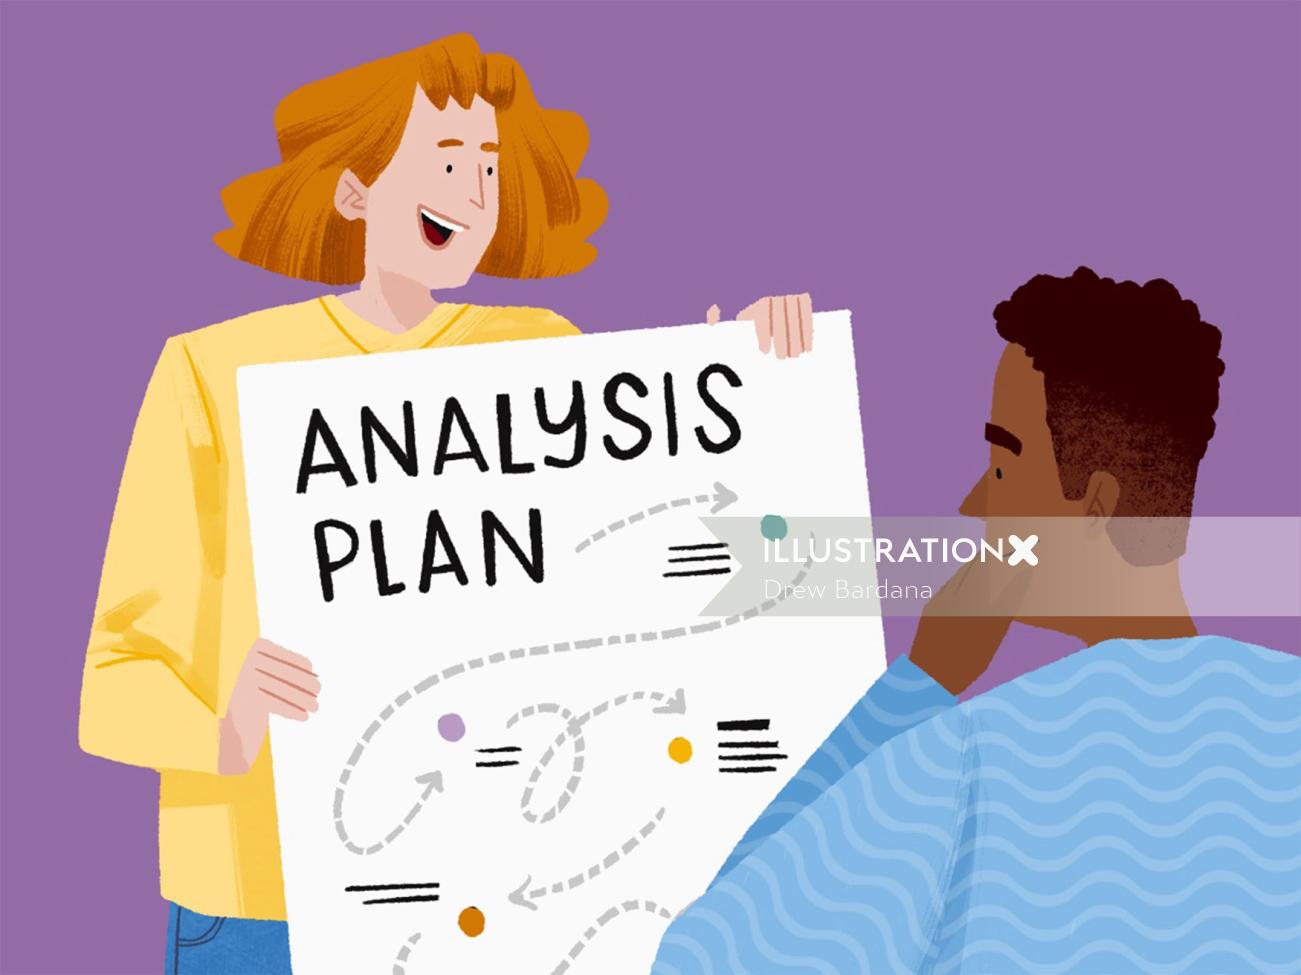 People Present your Analysis Plan
